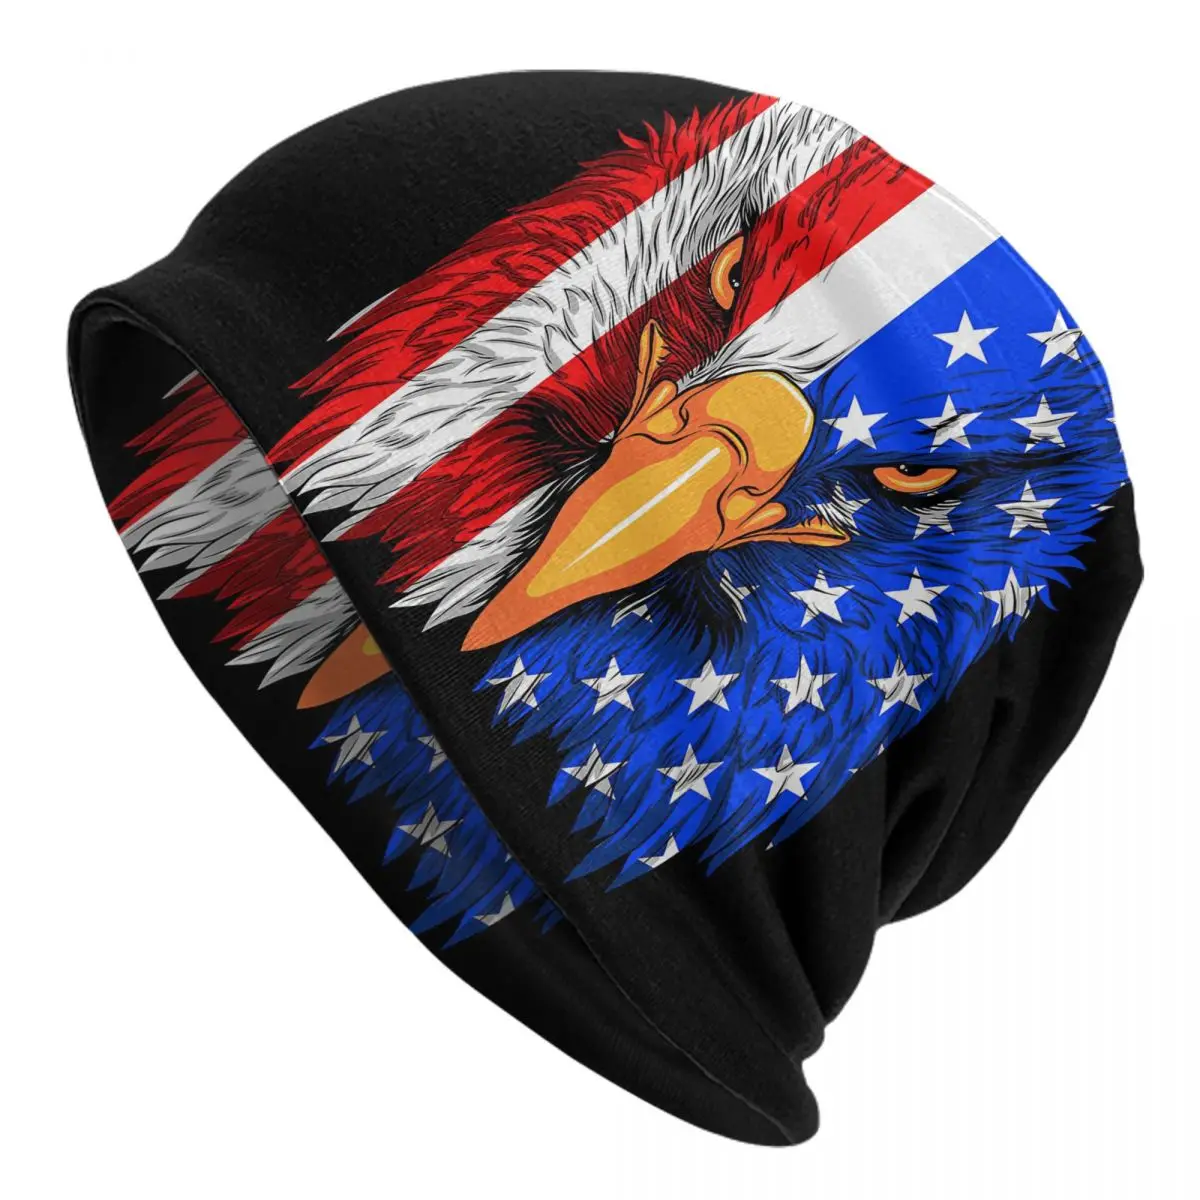 Patriotic Bald Eagle Head With USA Flag Adult Men's Women's Knit Hat Keep warm winter Funny knitted hat